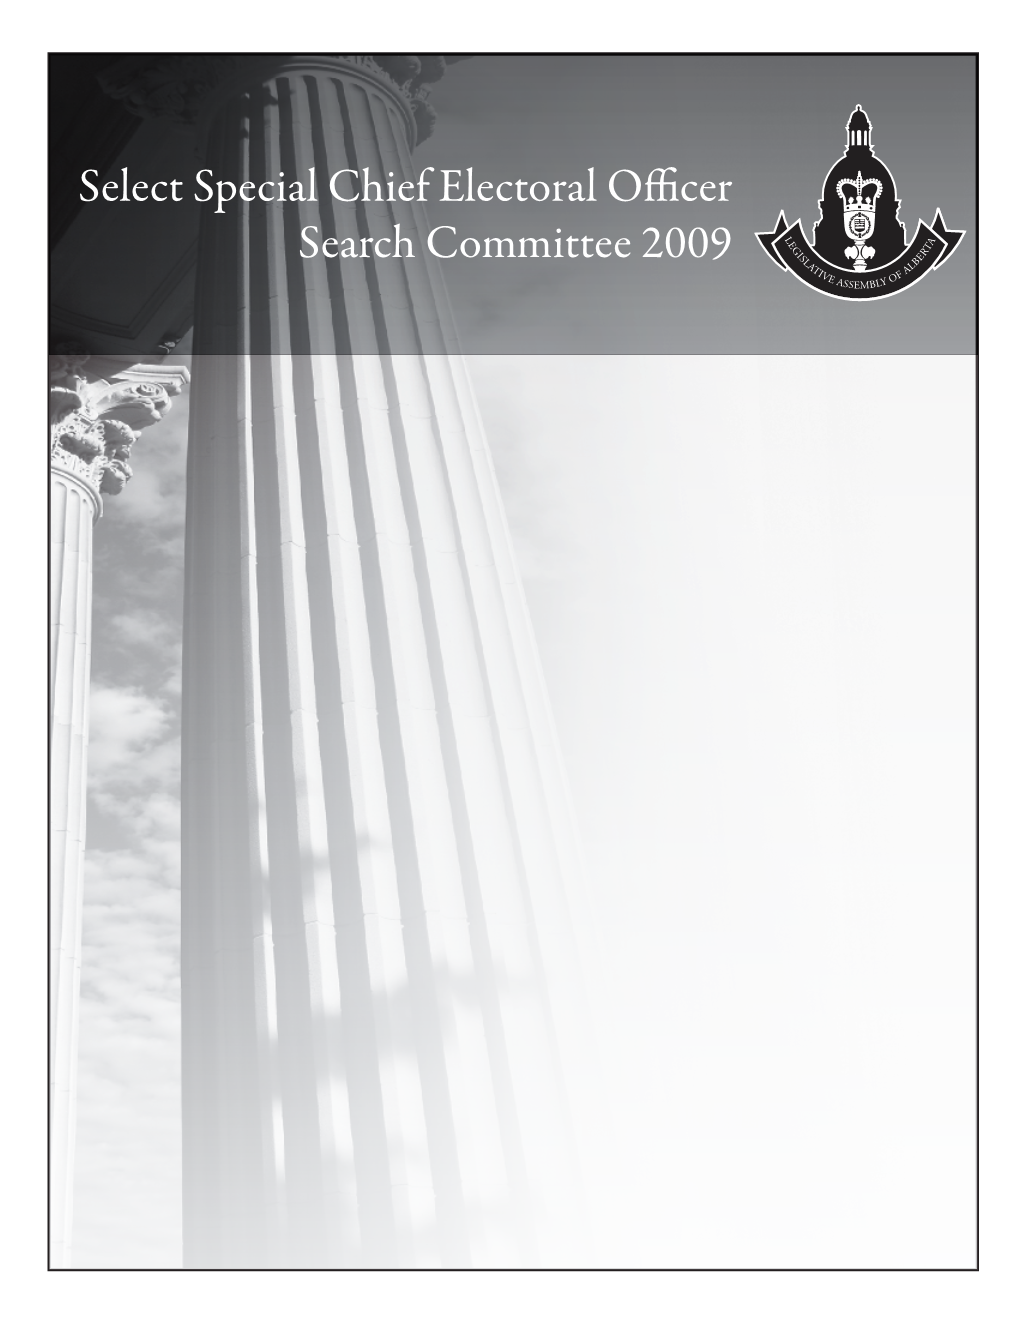 Select Special Chief Electoral Officer Search Committee 2009